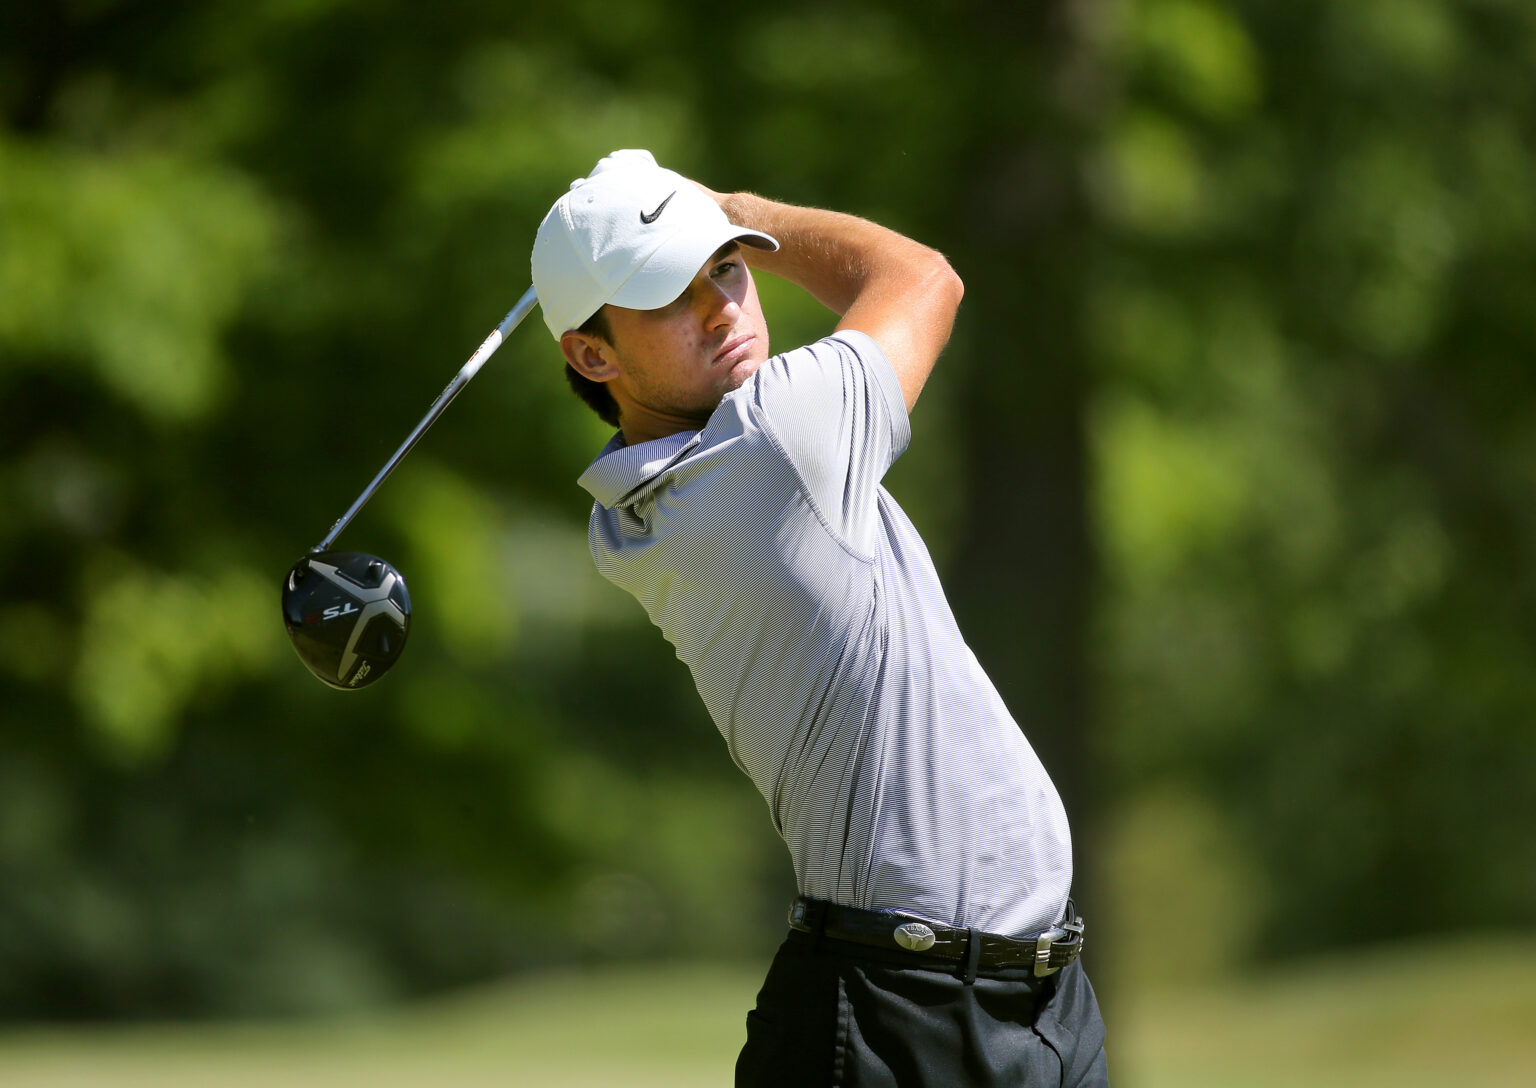 Parker Coody Goes Low To Climb Leaderboard The Official Website of